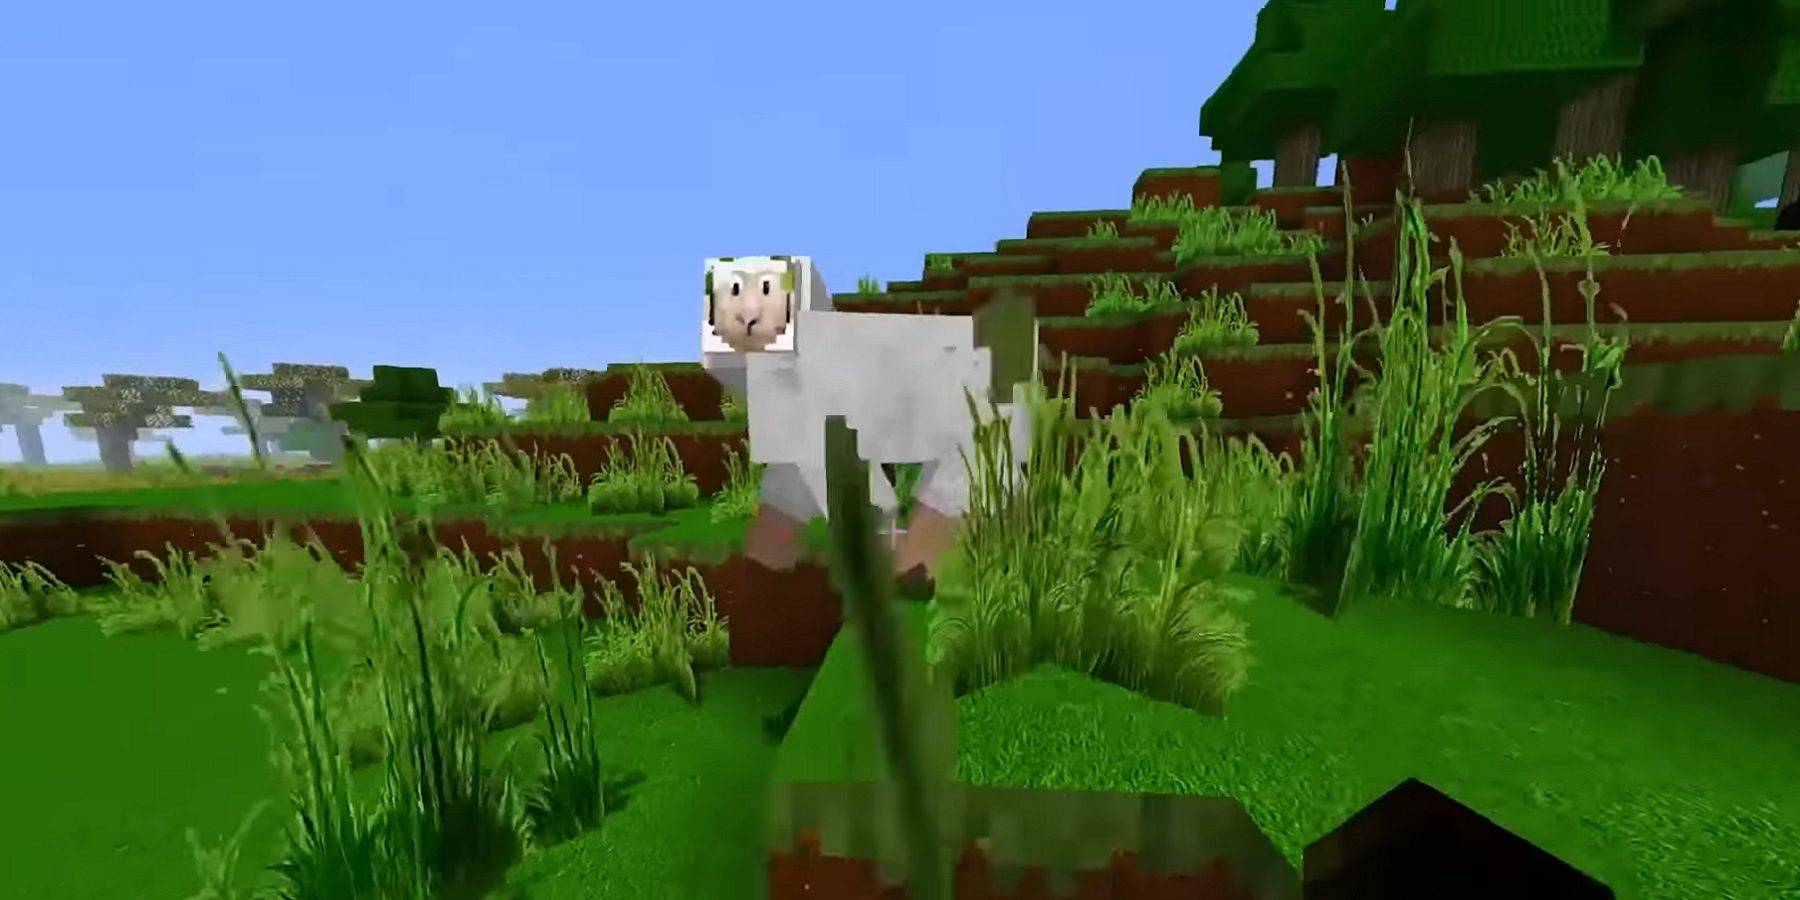 Image from Minecraft showing a sheep with an unusual face.